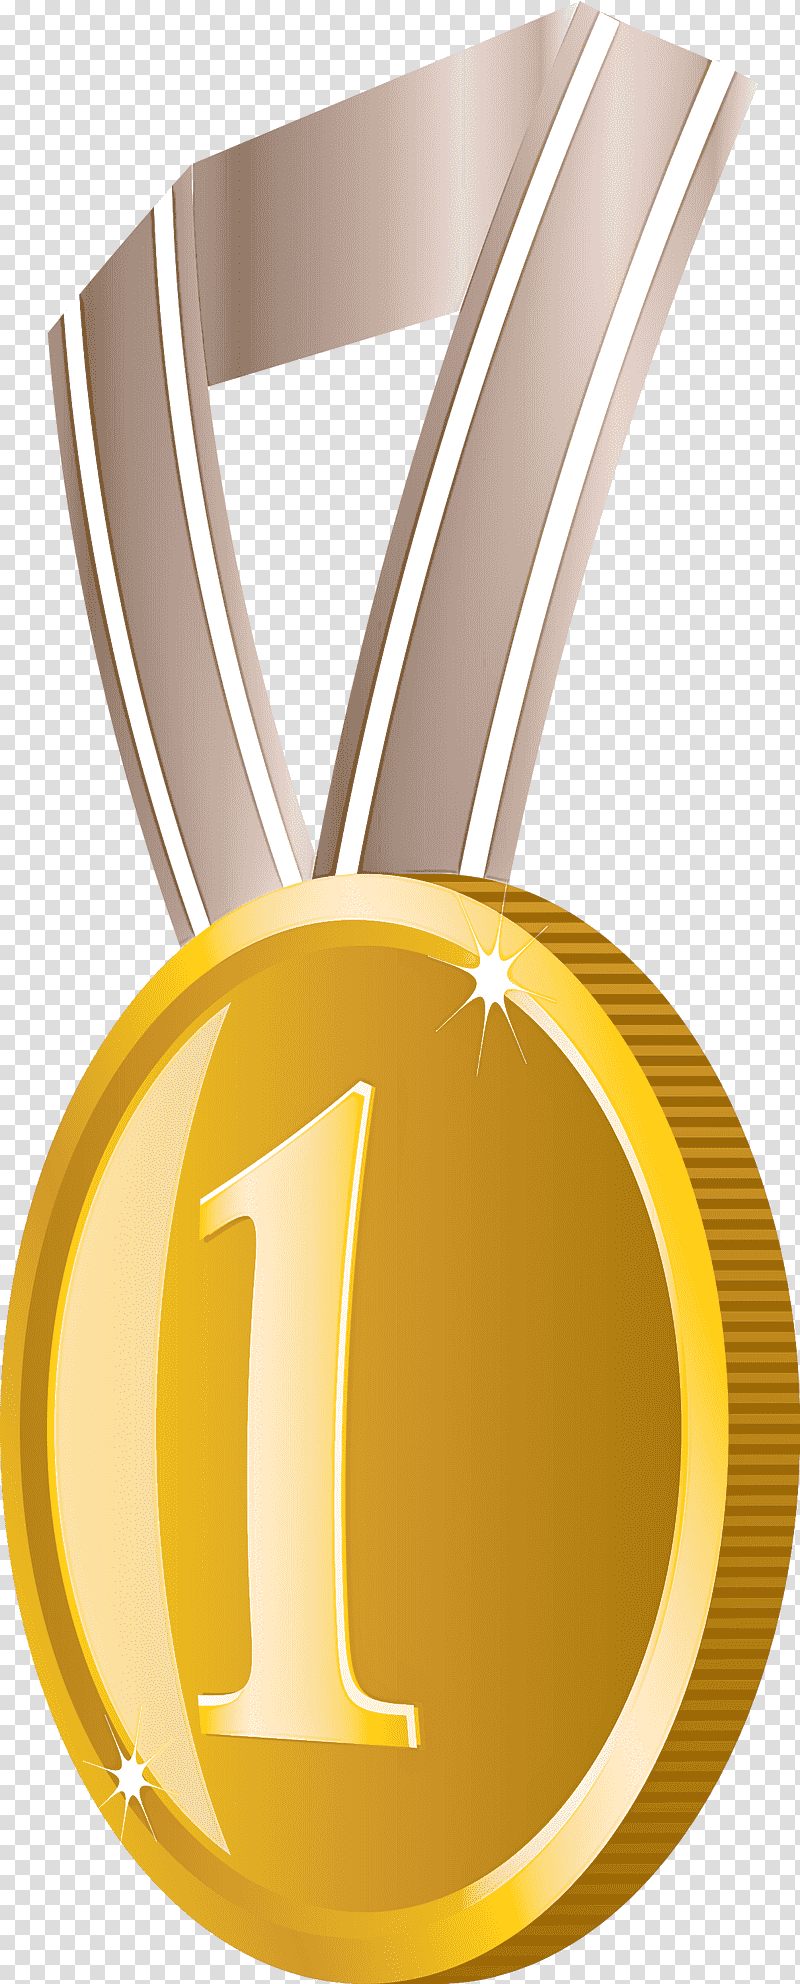 Gold Badge No 1 Badge Award Gold Badge, Medal, Gold Medal, Jewellery, Silver, Ribbon, Colored Gold transparent background PNG clipart